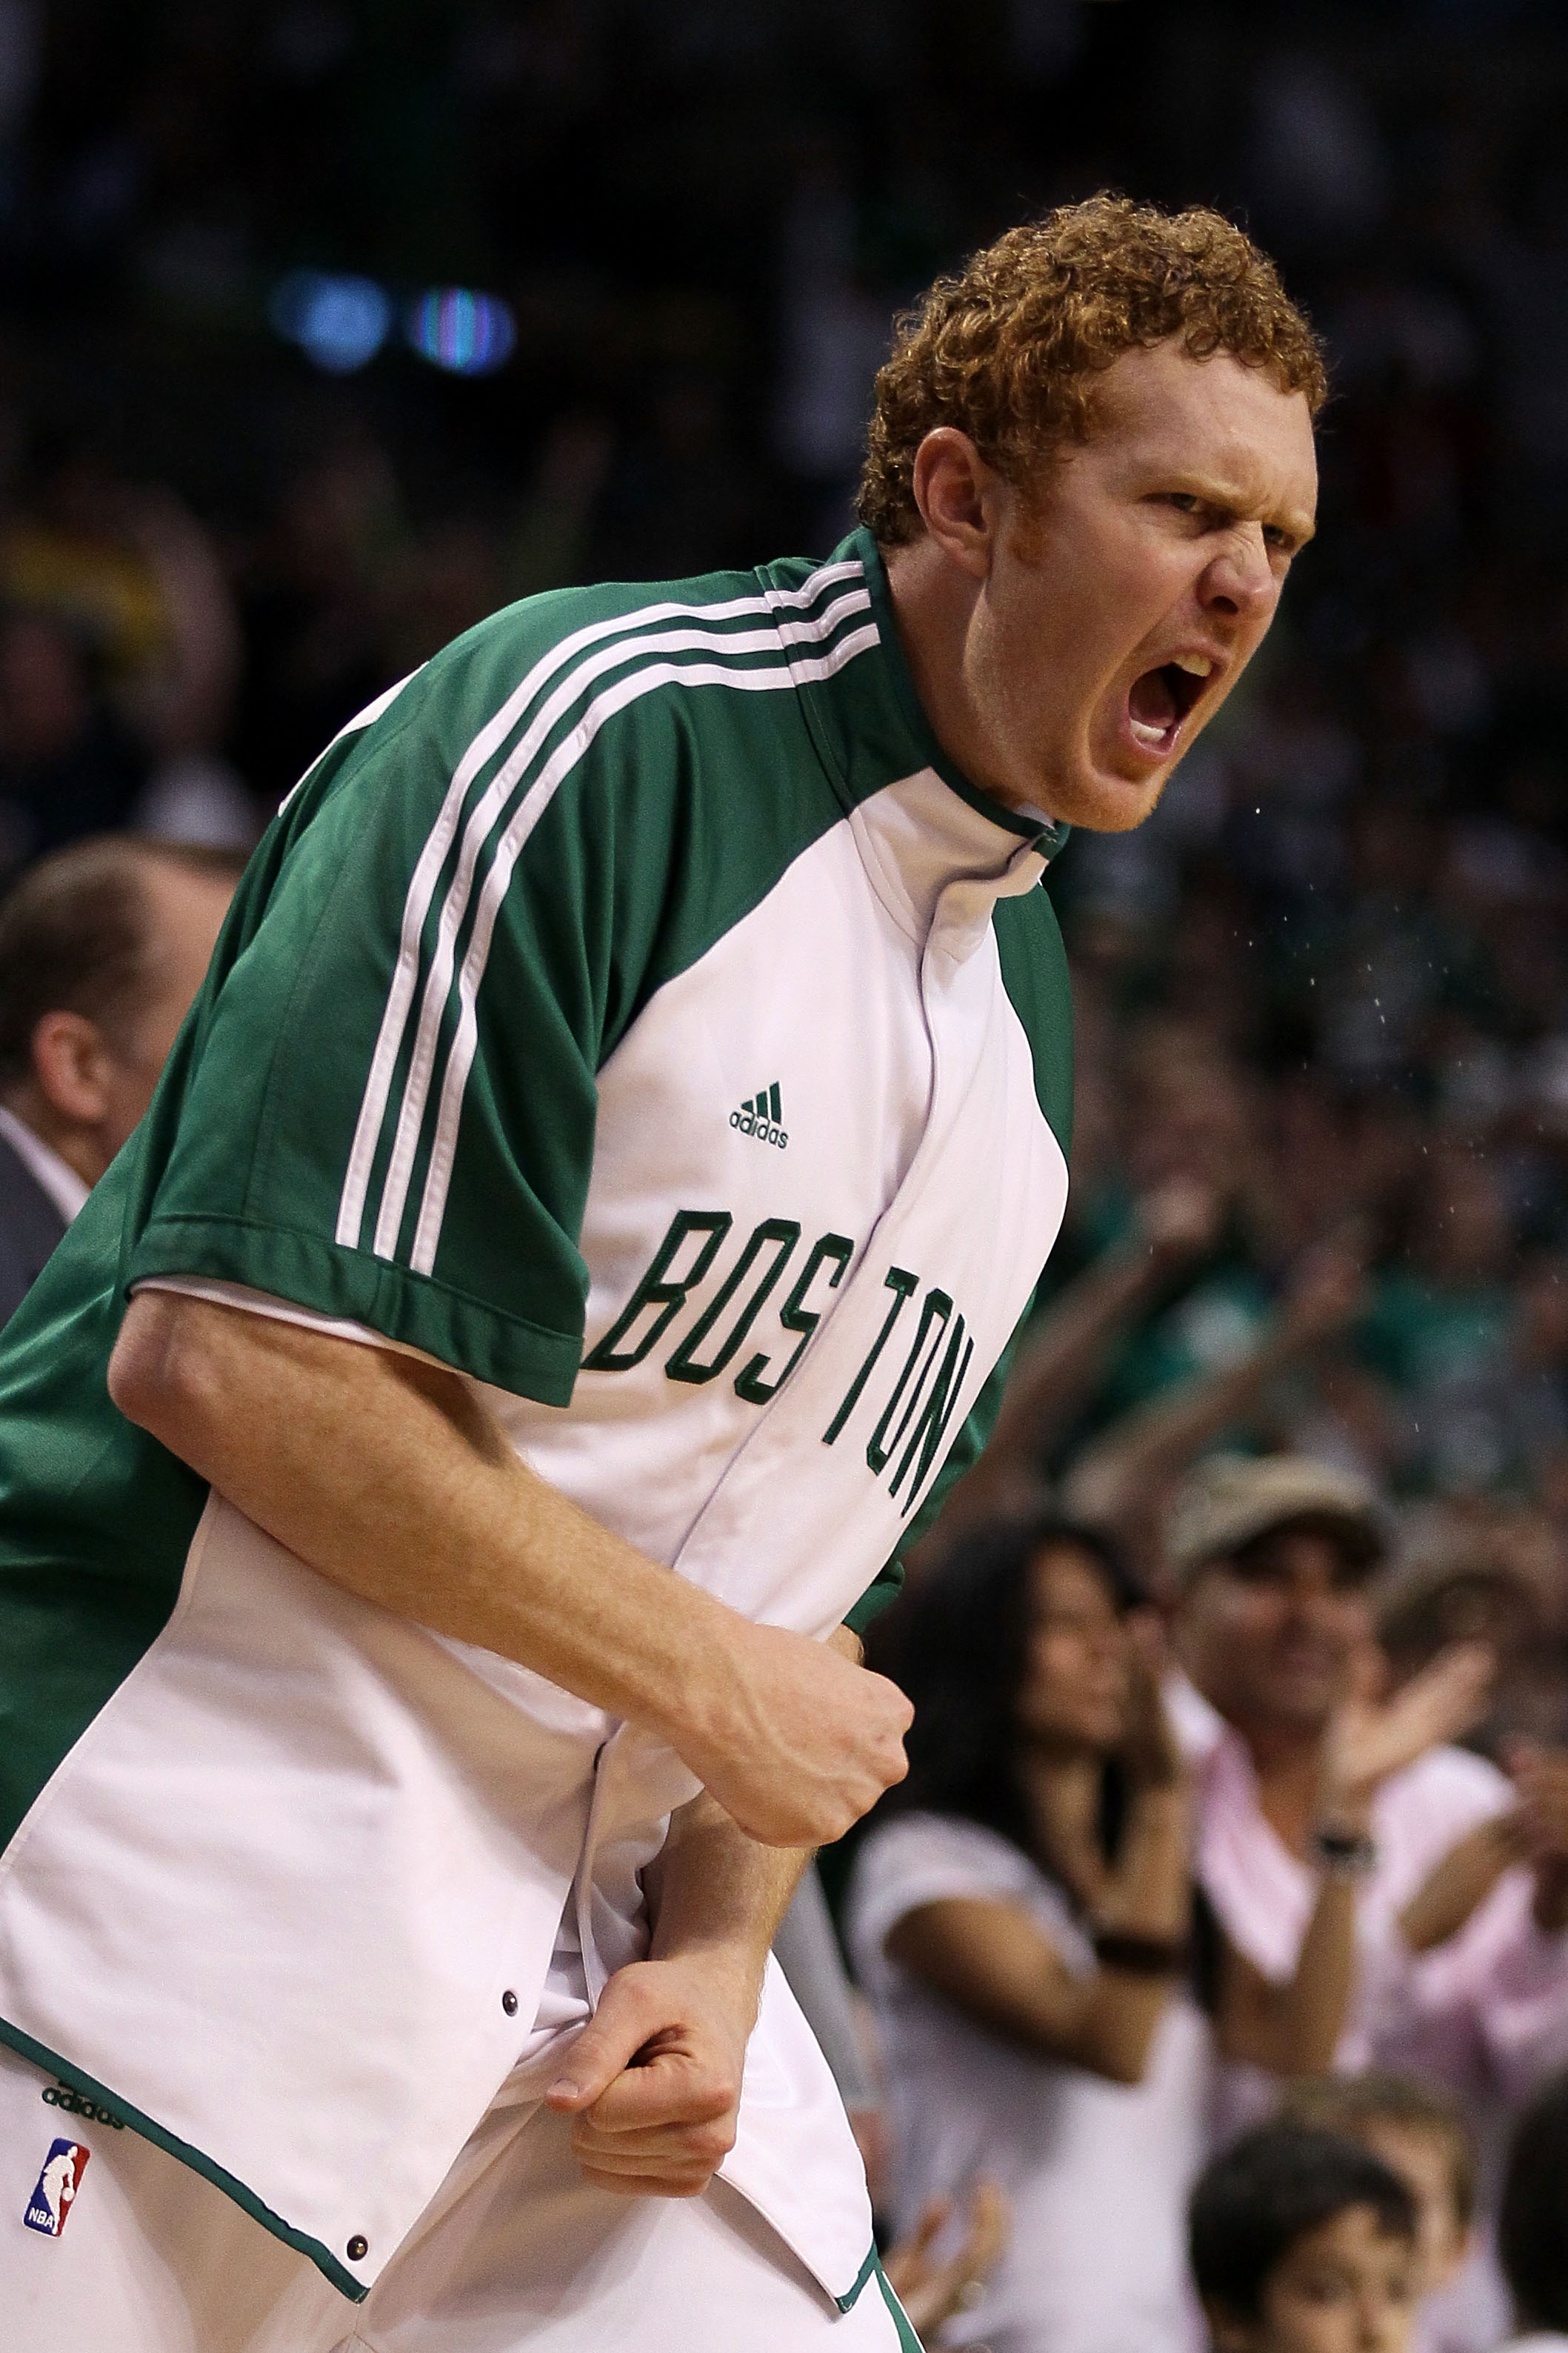 WATCH: Has Brian Scalabrine thought up a way to refocus the Boston